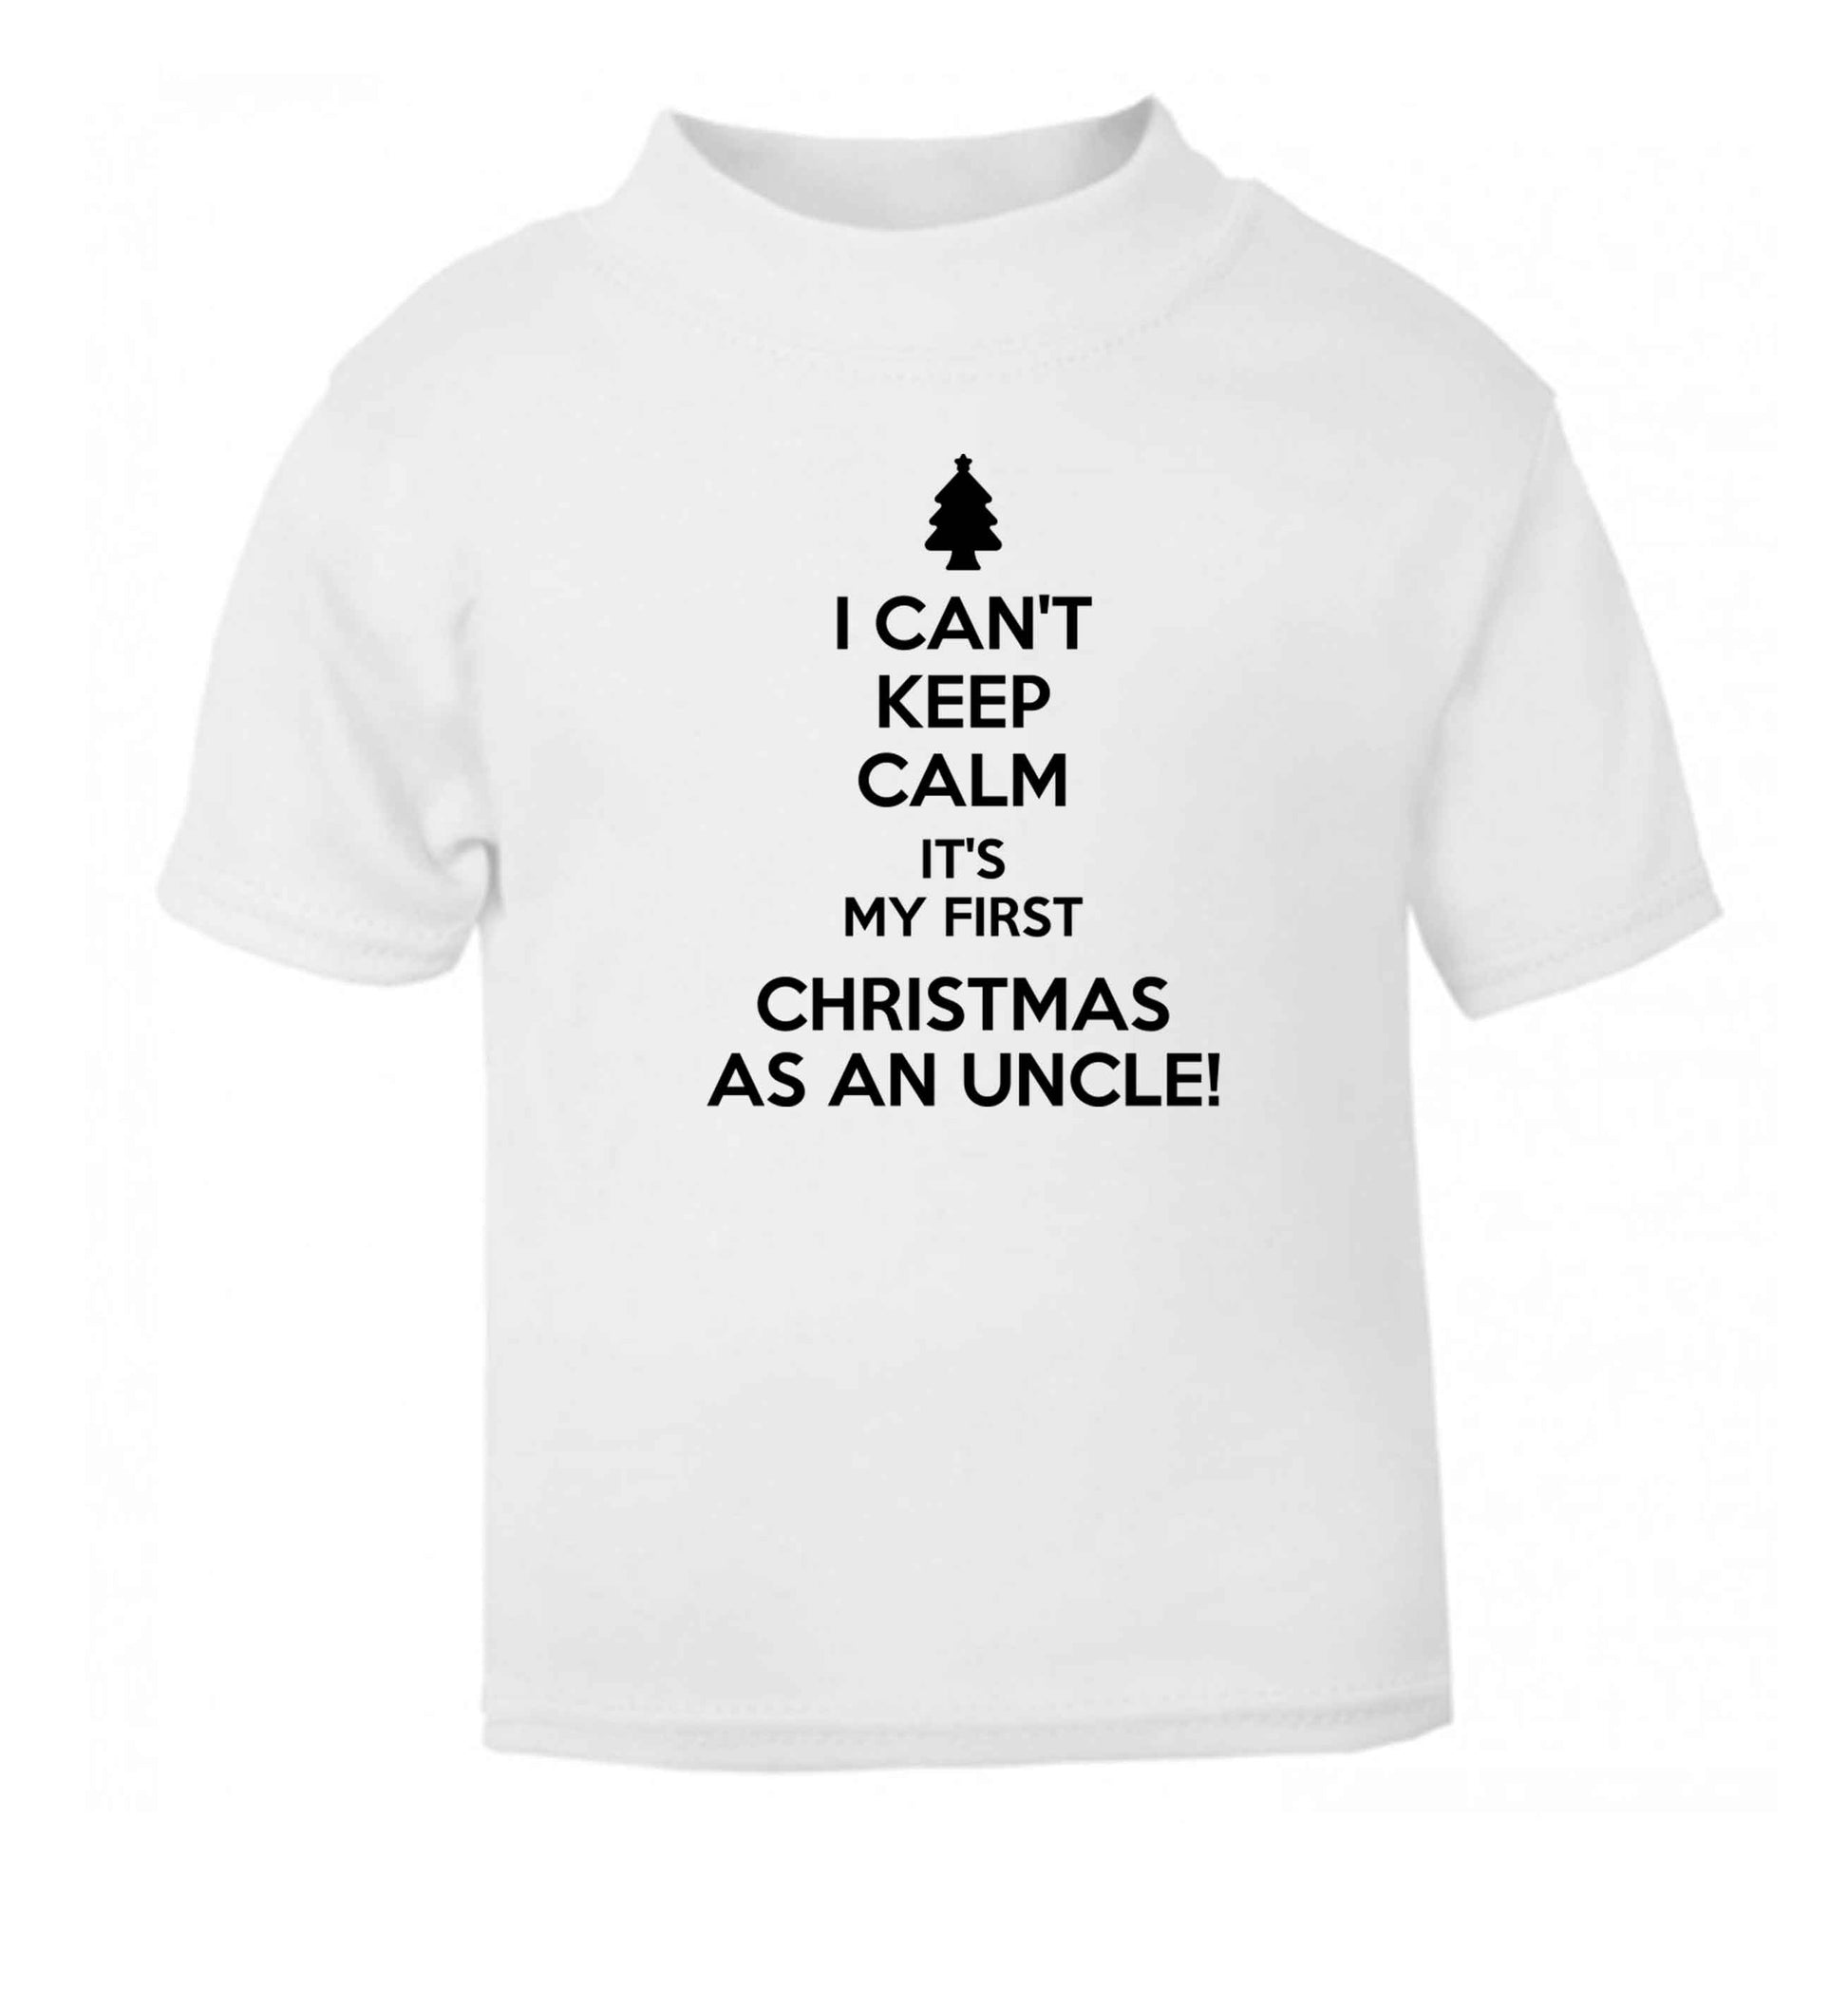 I can't keep calm it's my first Christmas as an uncle! white Baby Toddler Tshirt 2 Years